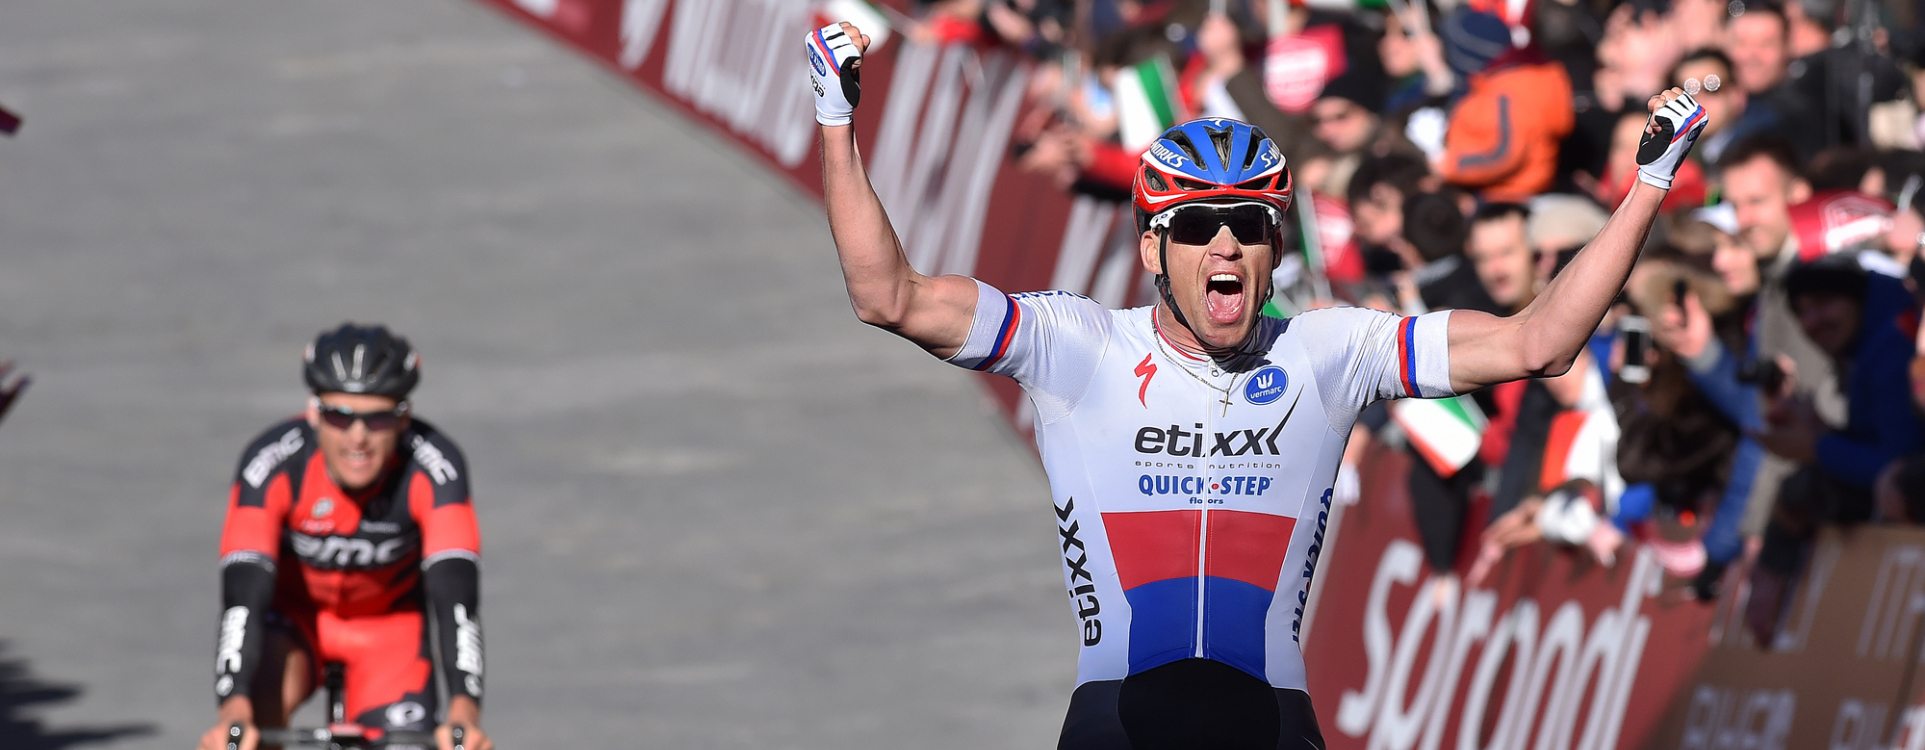 Victory for Zdenek in the Strade Bianche!!